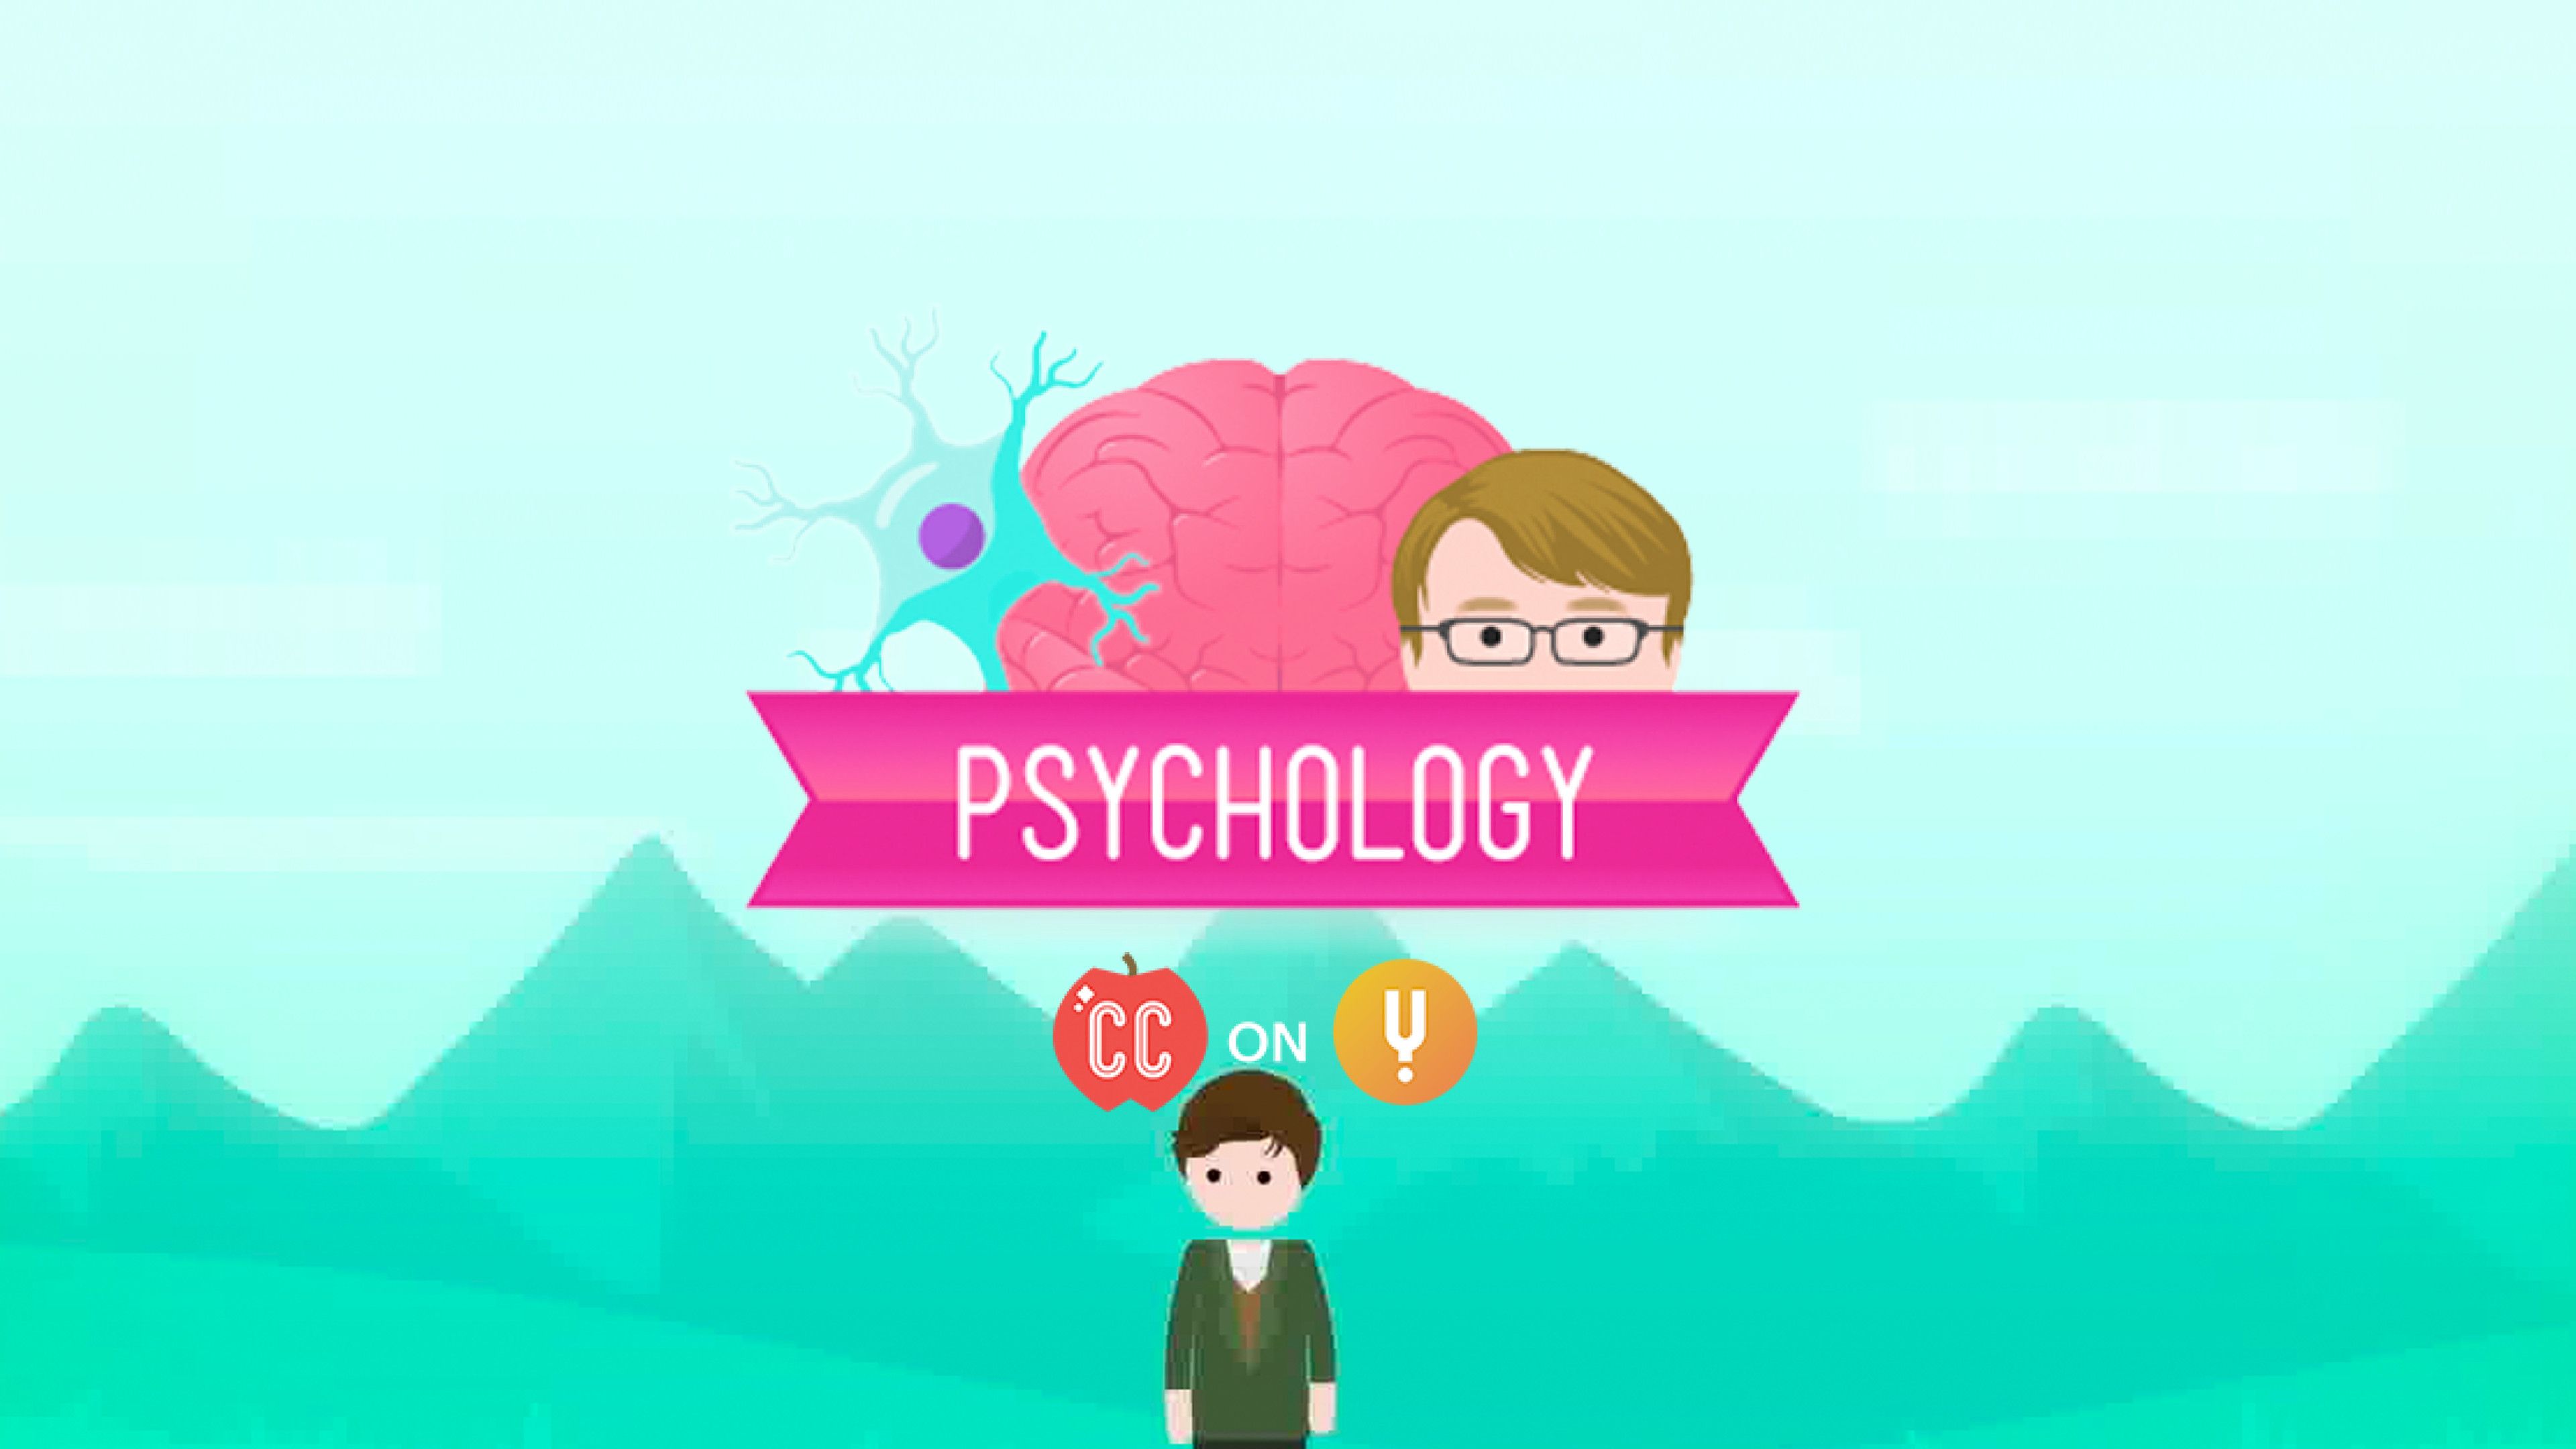 Curiosity Stream - The Growth of Knowledge: Crash Course Psychology #18